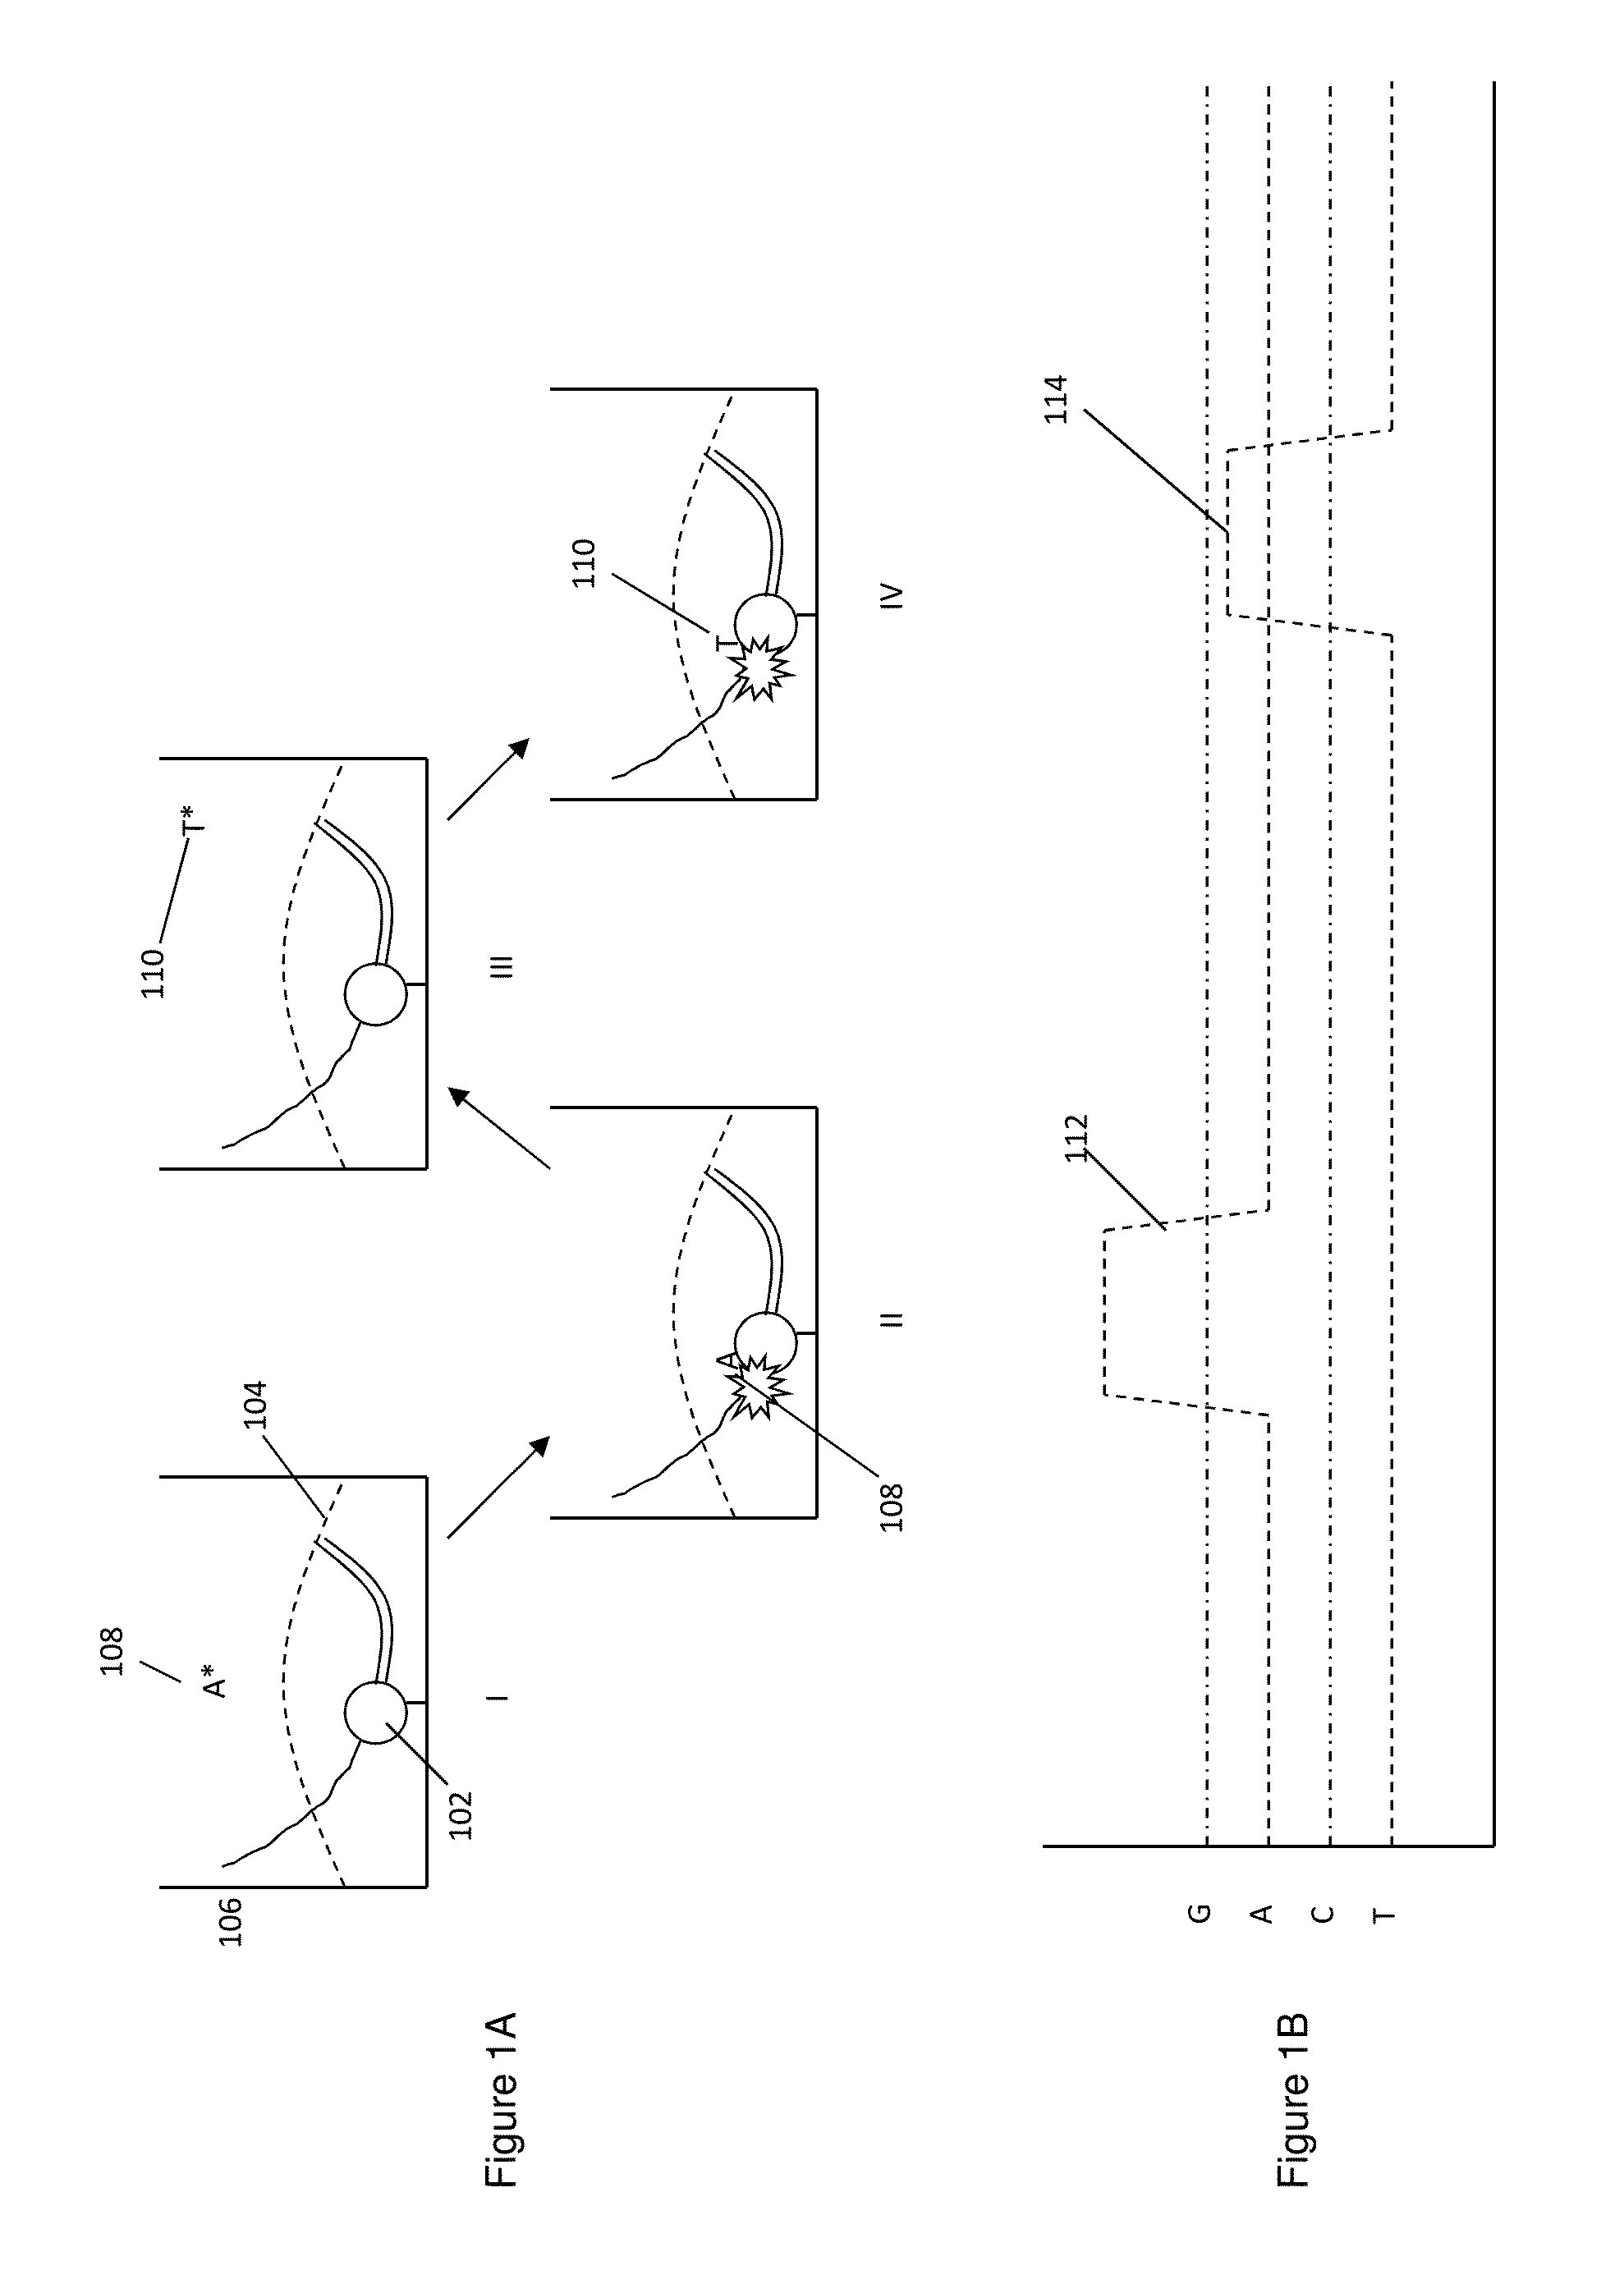 Arrays of integrated analytical devices and methods for production